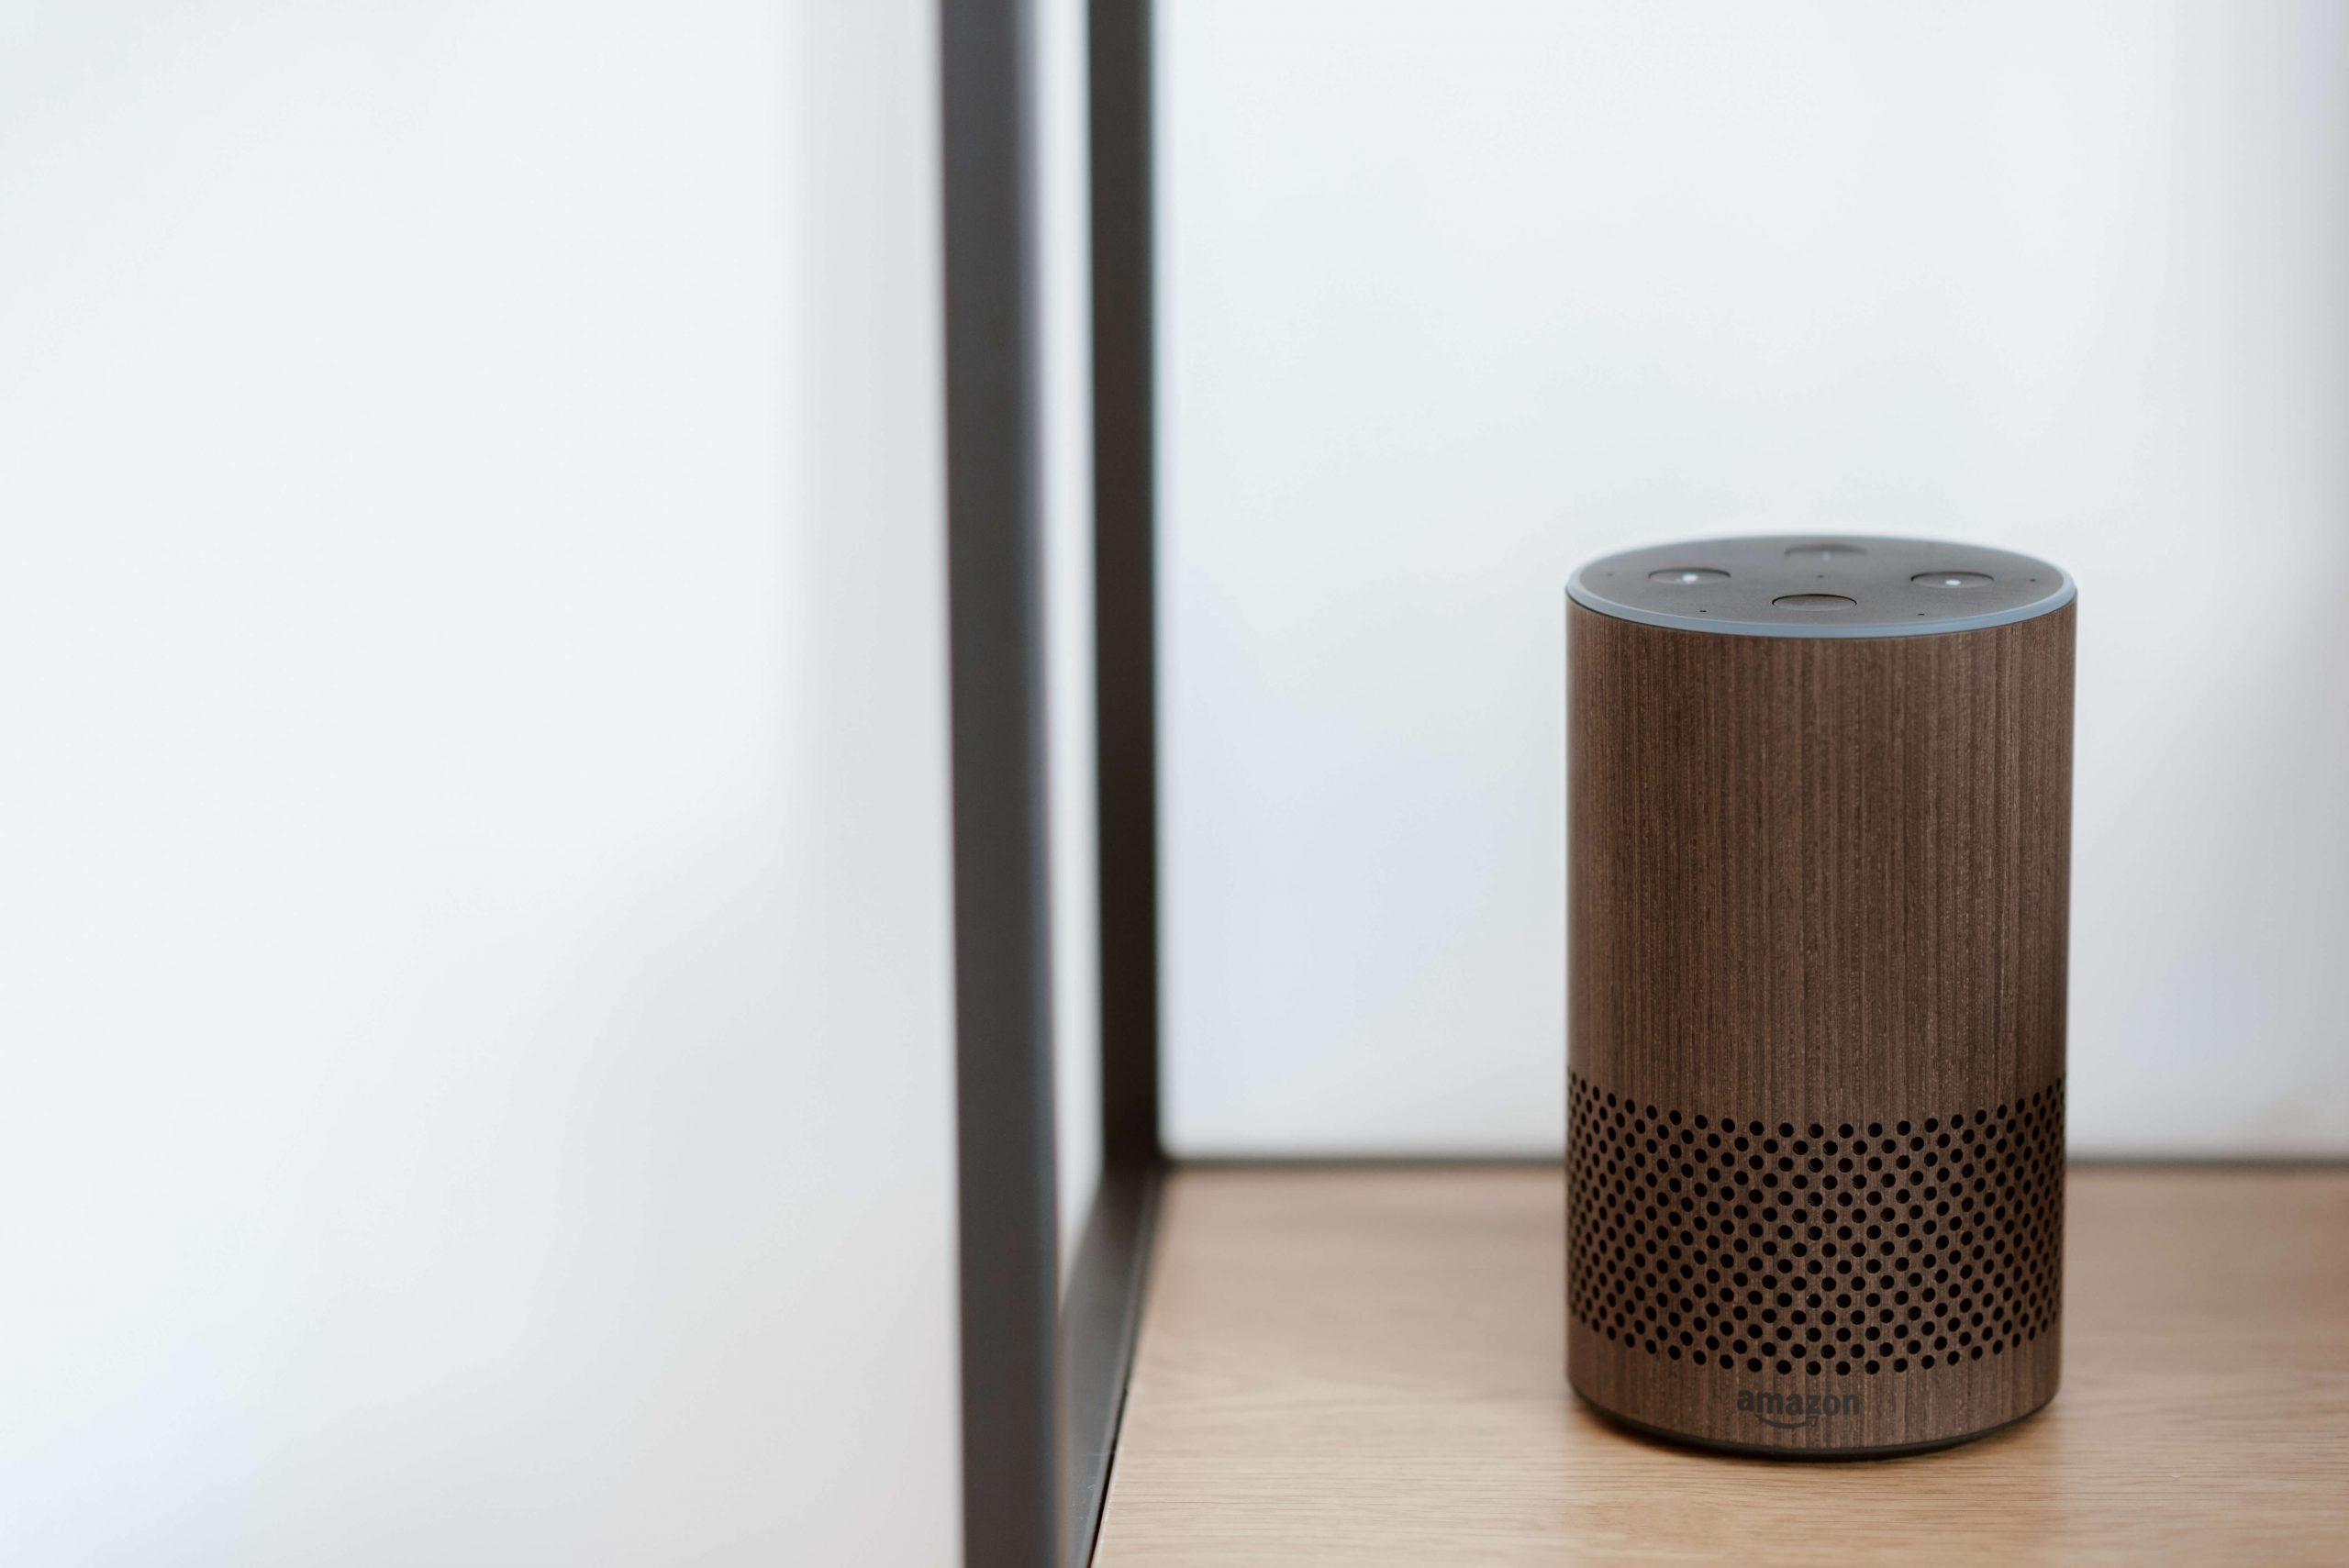 Alexa security and privacy concerns